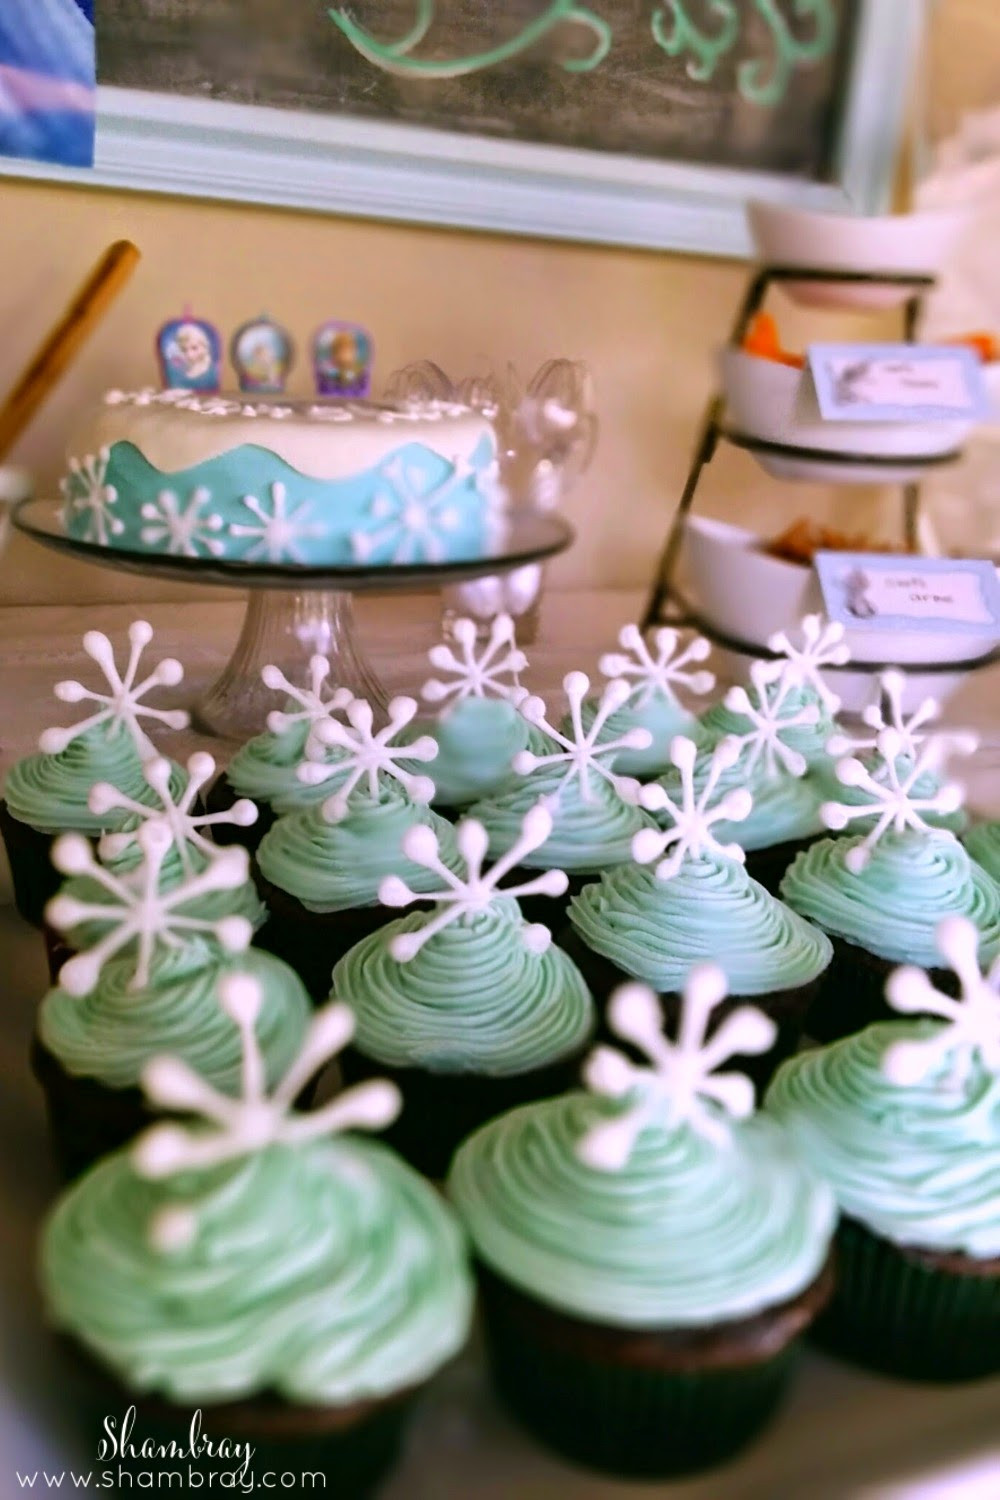 Winter Birthday Party Ideas For 3 Year Olds
 Shambray A Frozen Birthday Party for a 3 year old